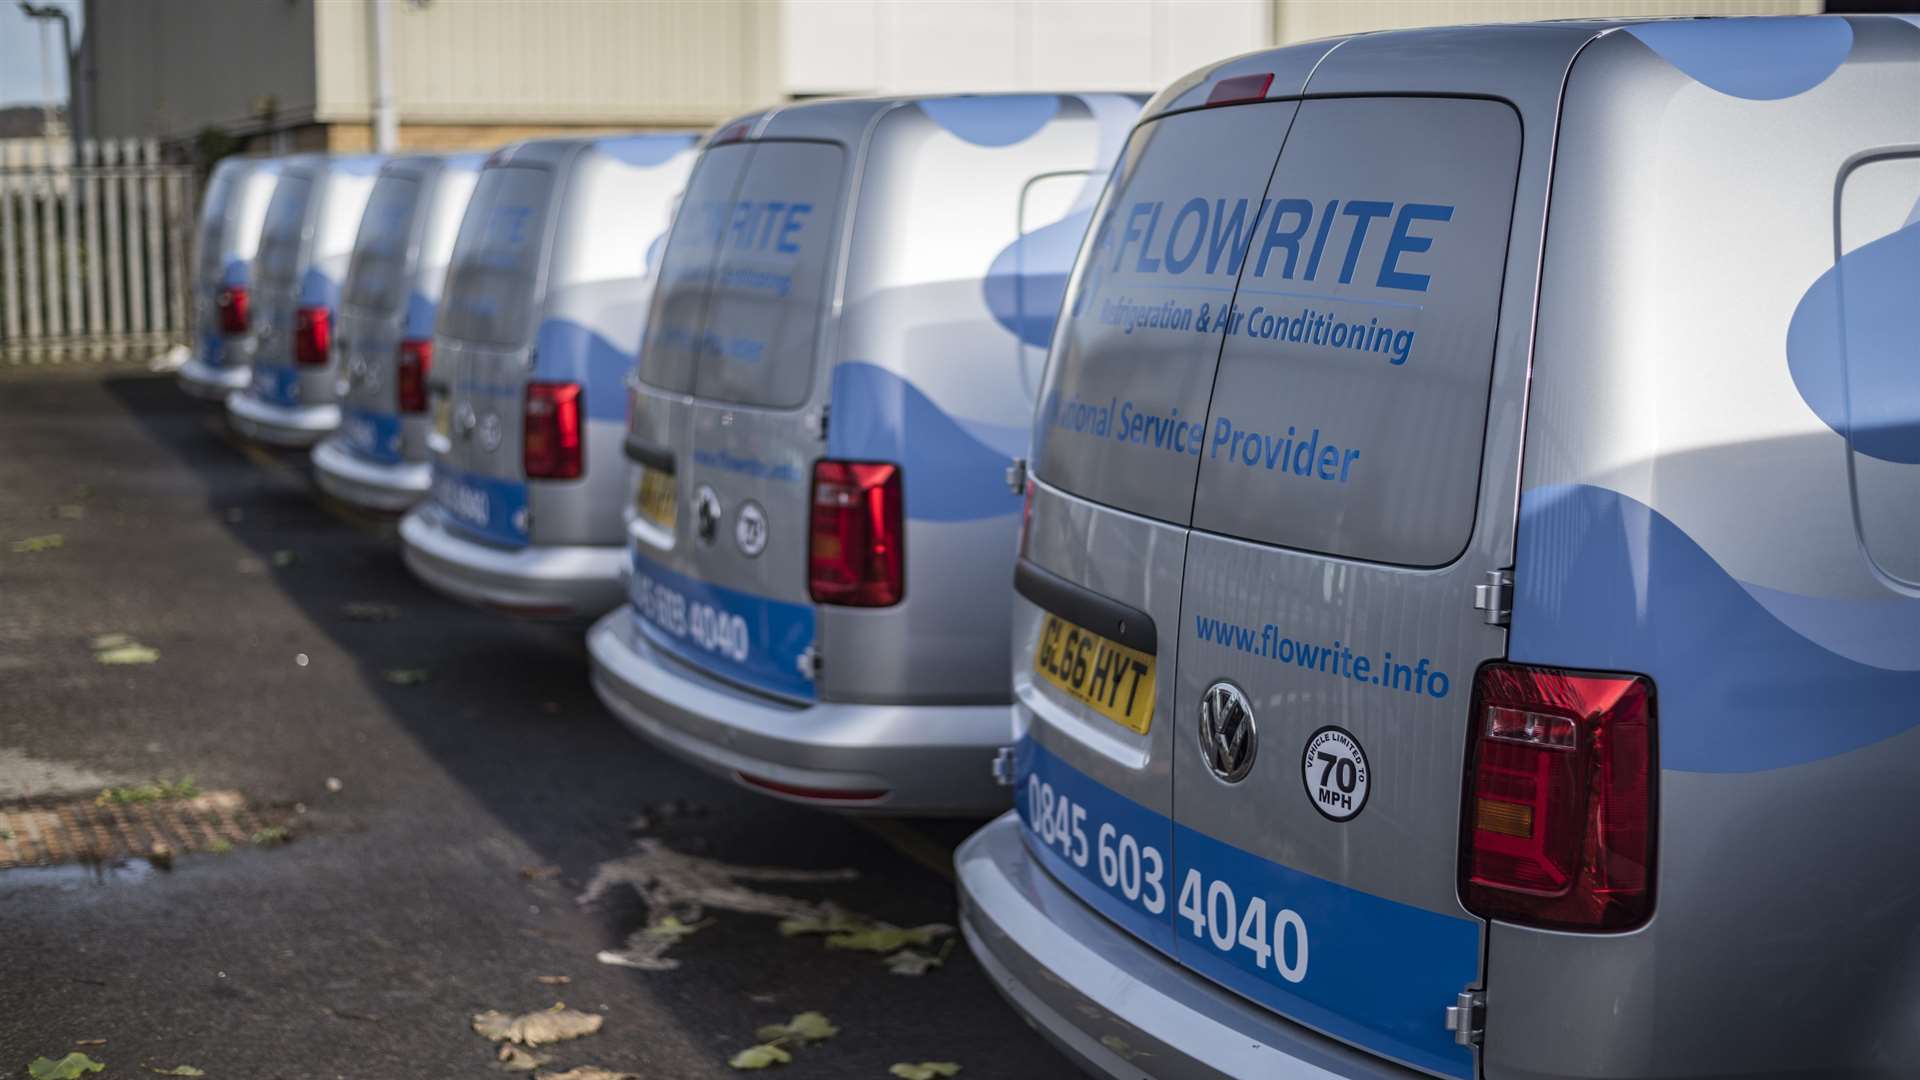 Flowrite has secured a £3 million funding package